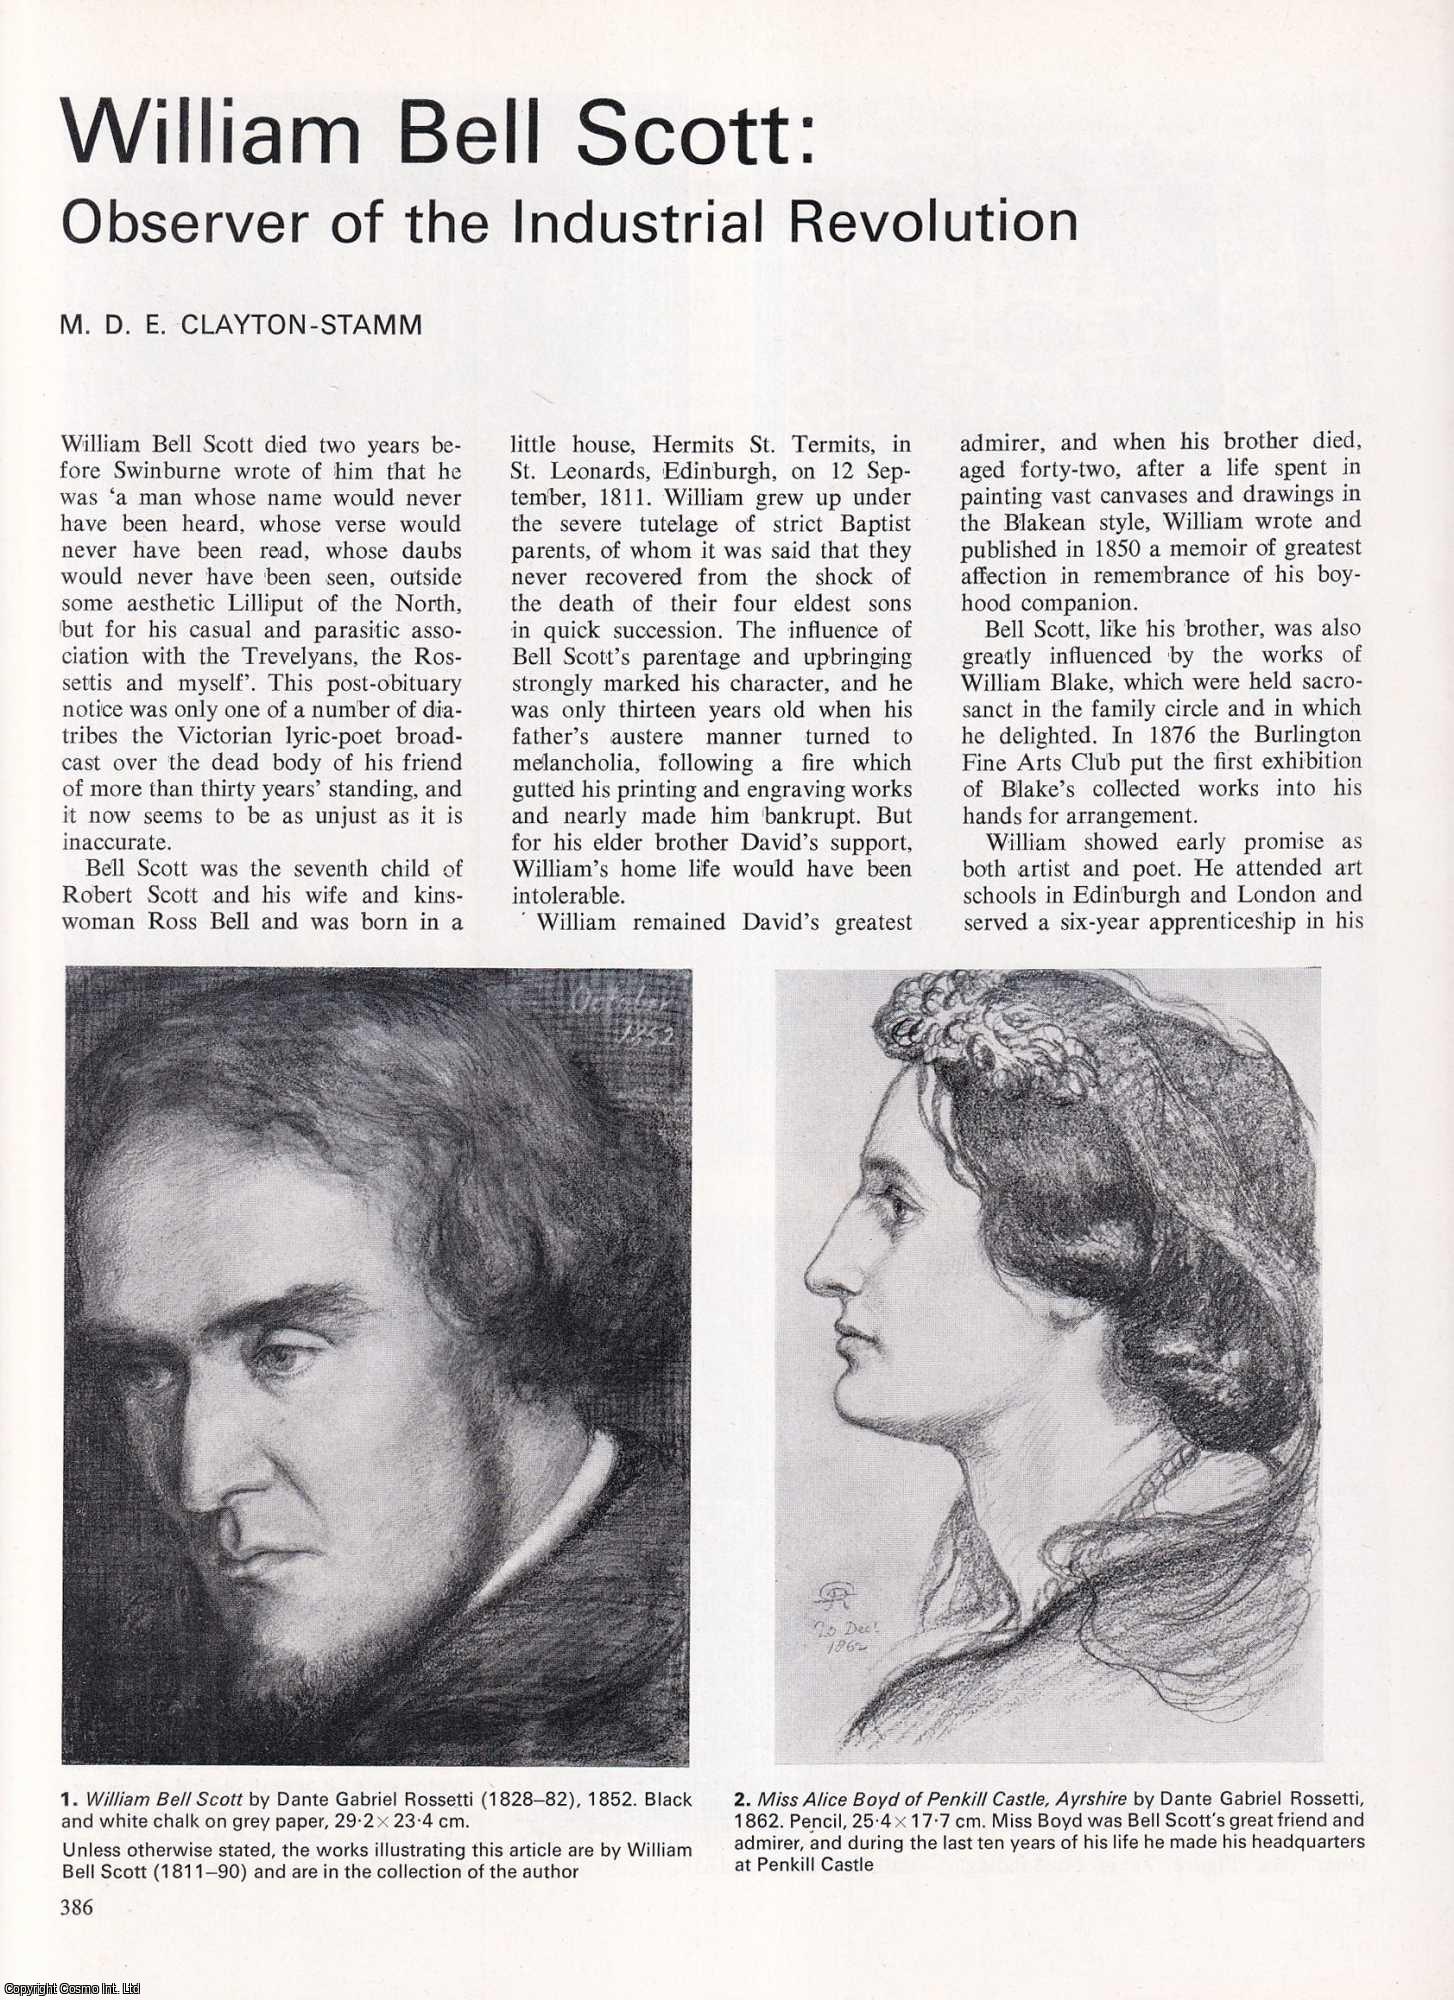 M.D.E. Clayton-Stamm - William Bell Scott: Observer of the Industrial Revolution. An original article from Apollo, International Magazine of the Arts, 1969.